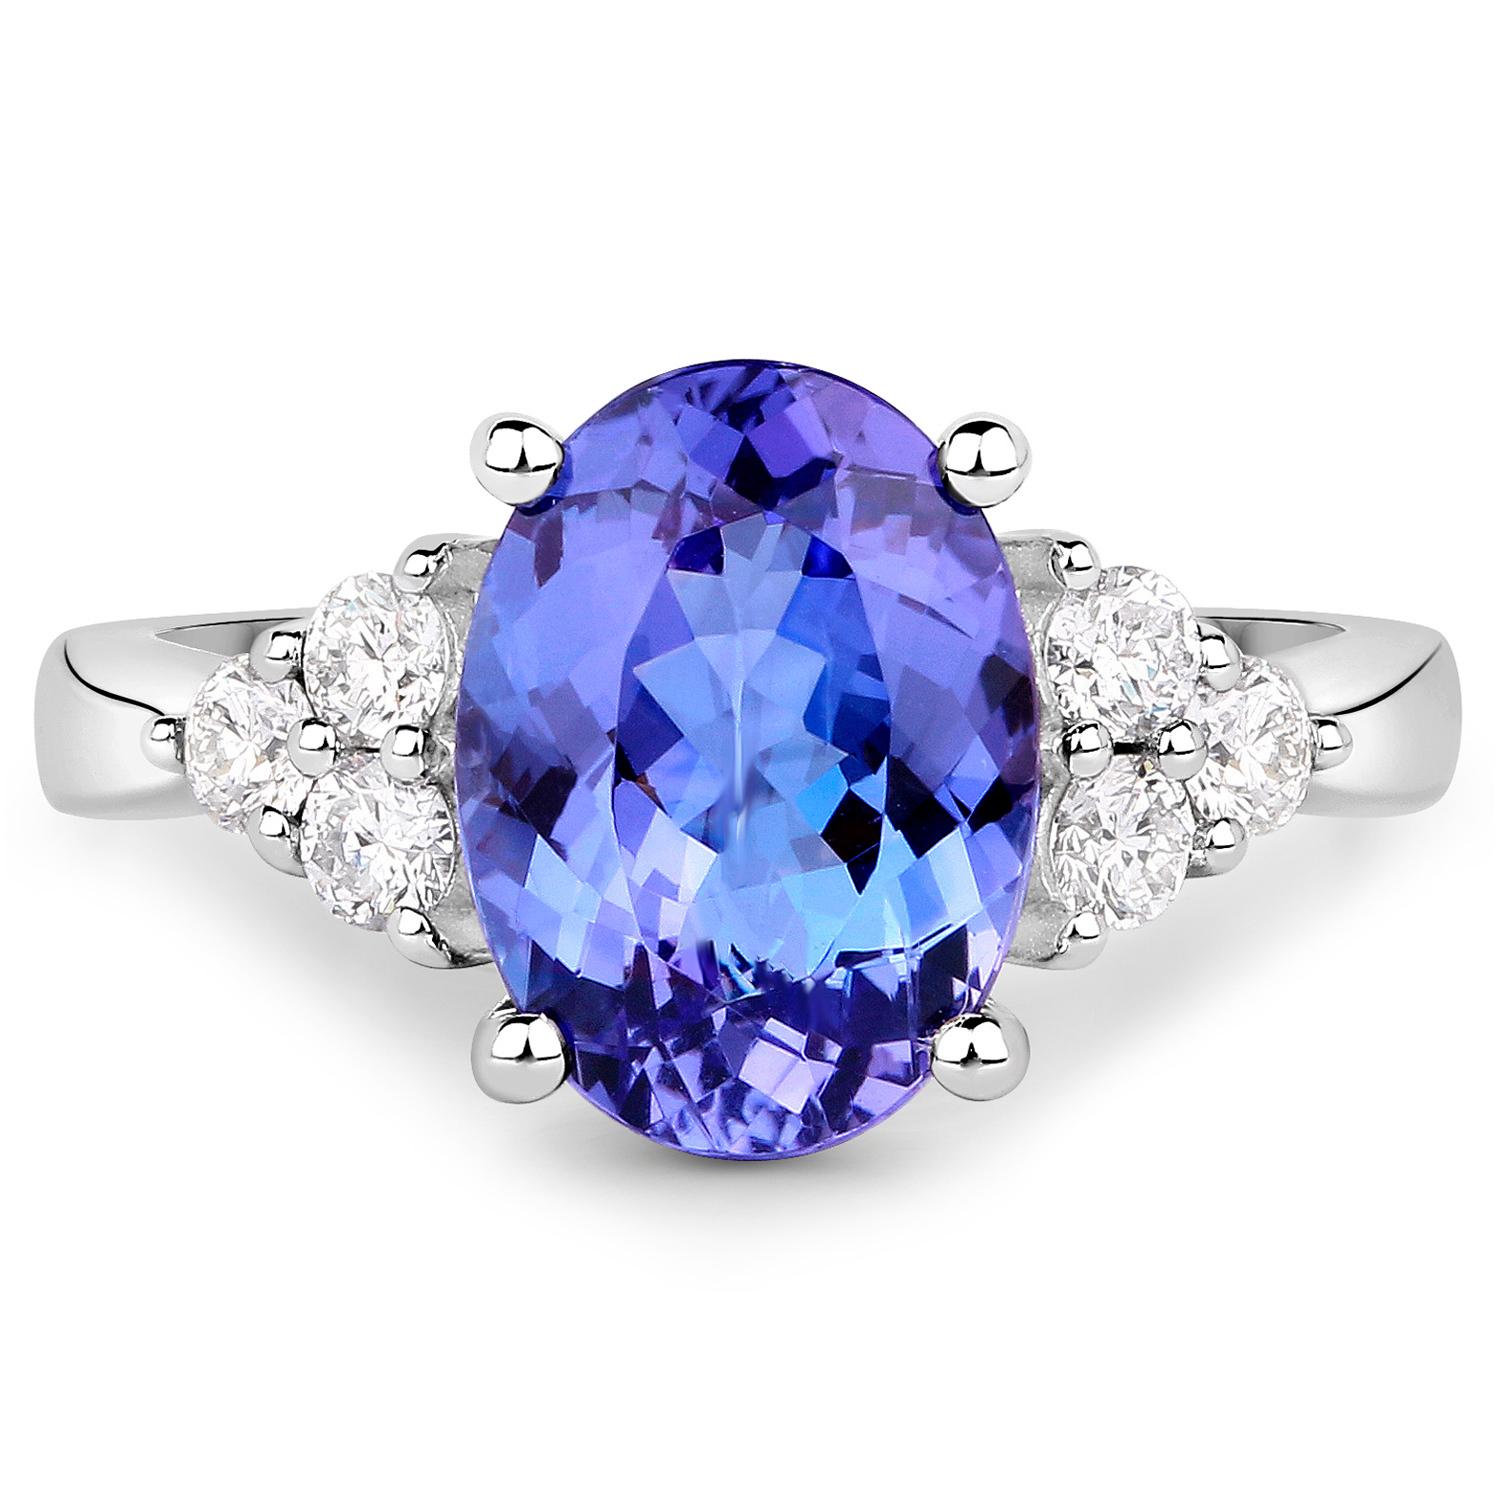 Tanzanite Solitaire Ring 3.9 Carats Diamond Setting 14K White Gold In Excellent Condition For Sale In Laguna Niguel, CA